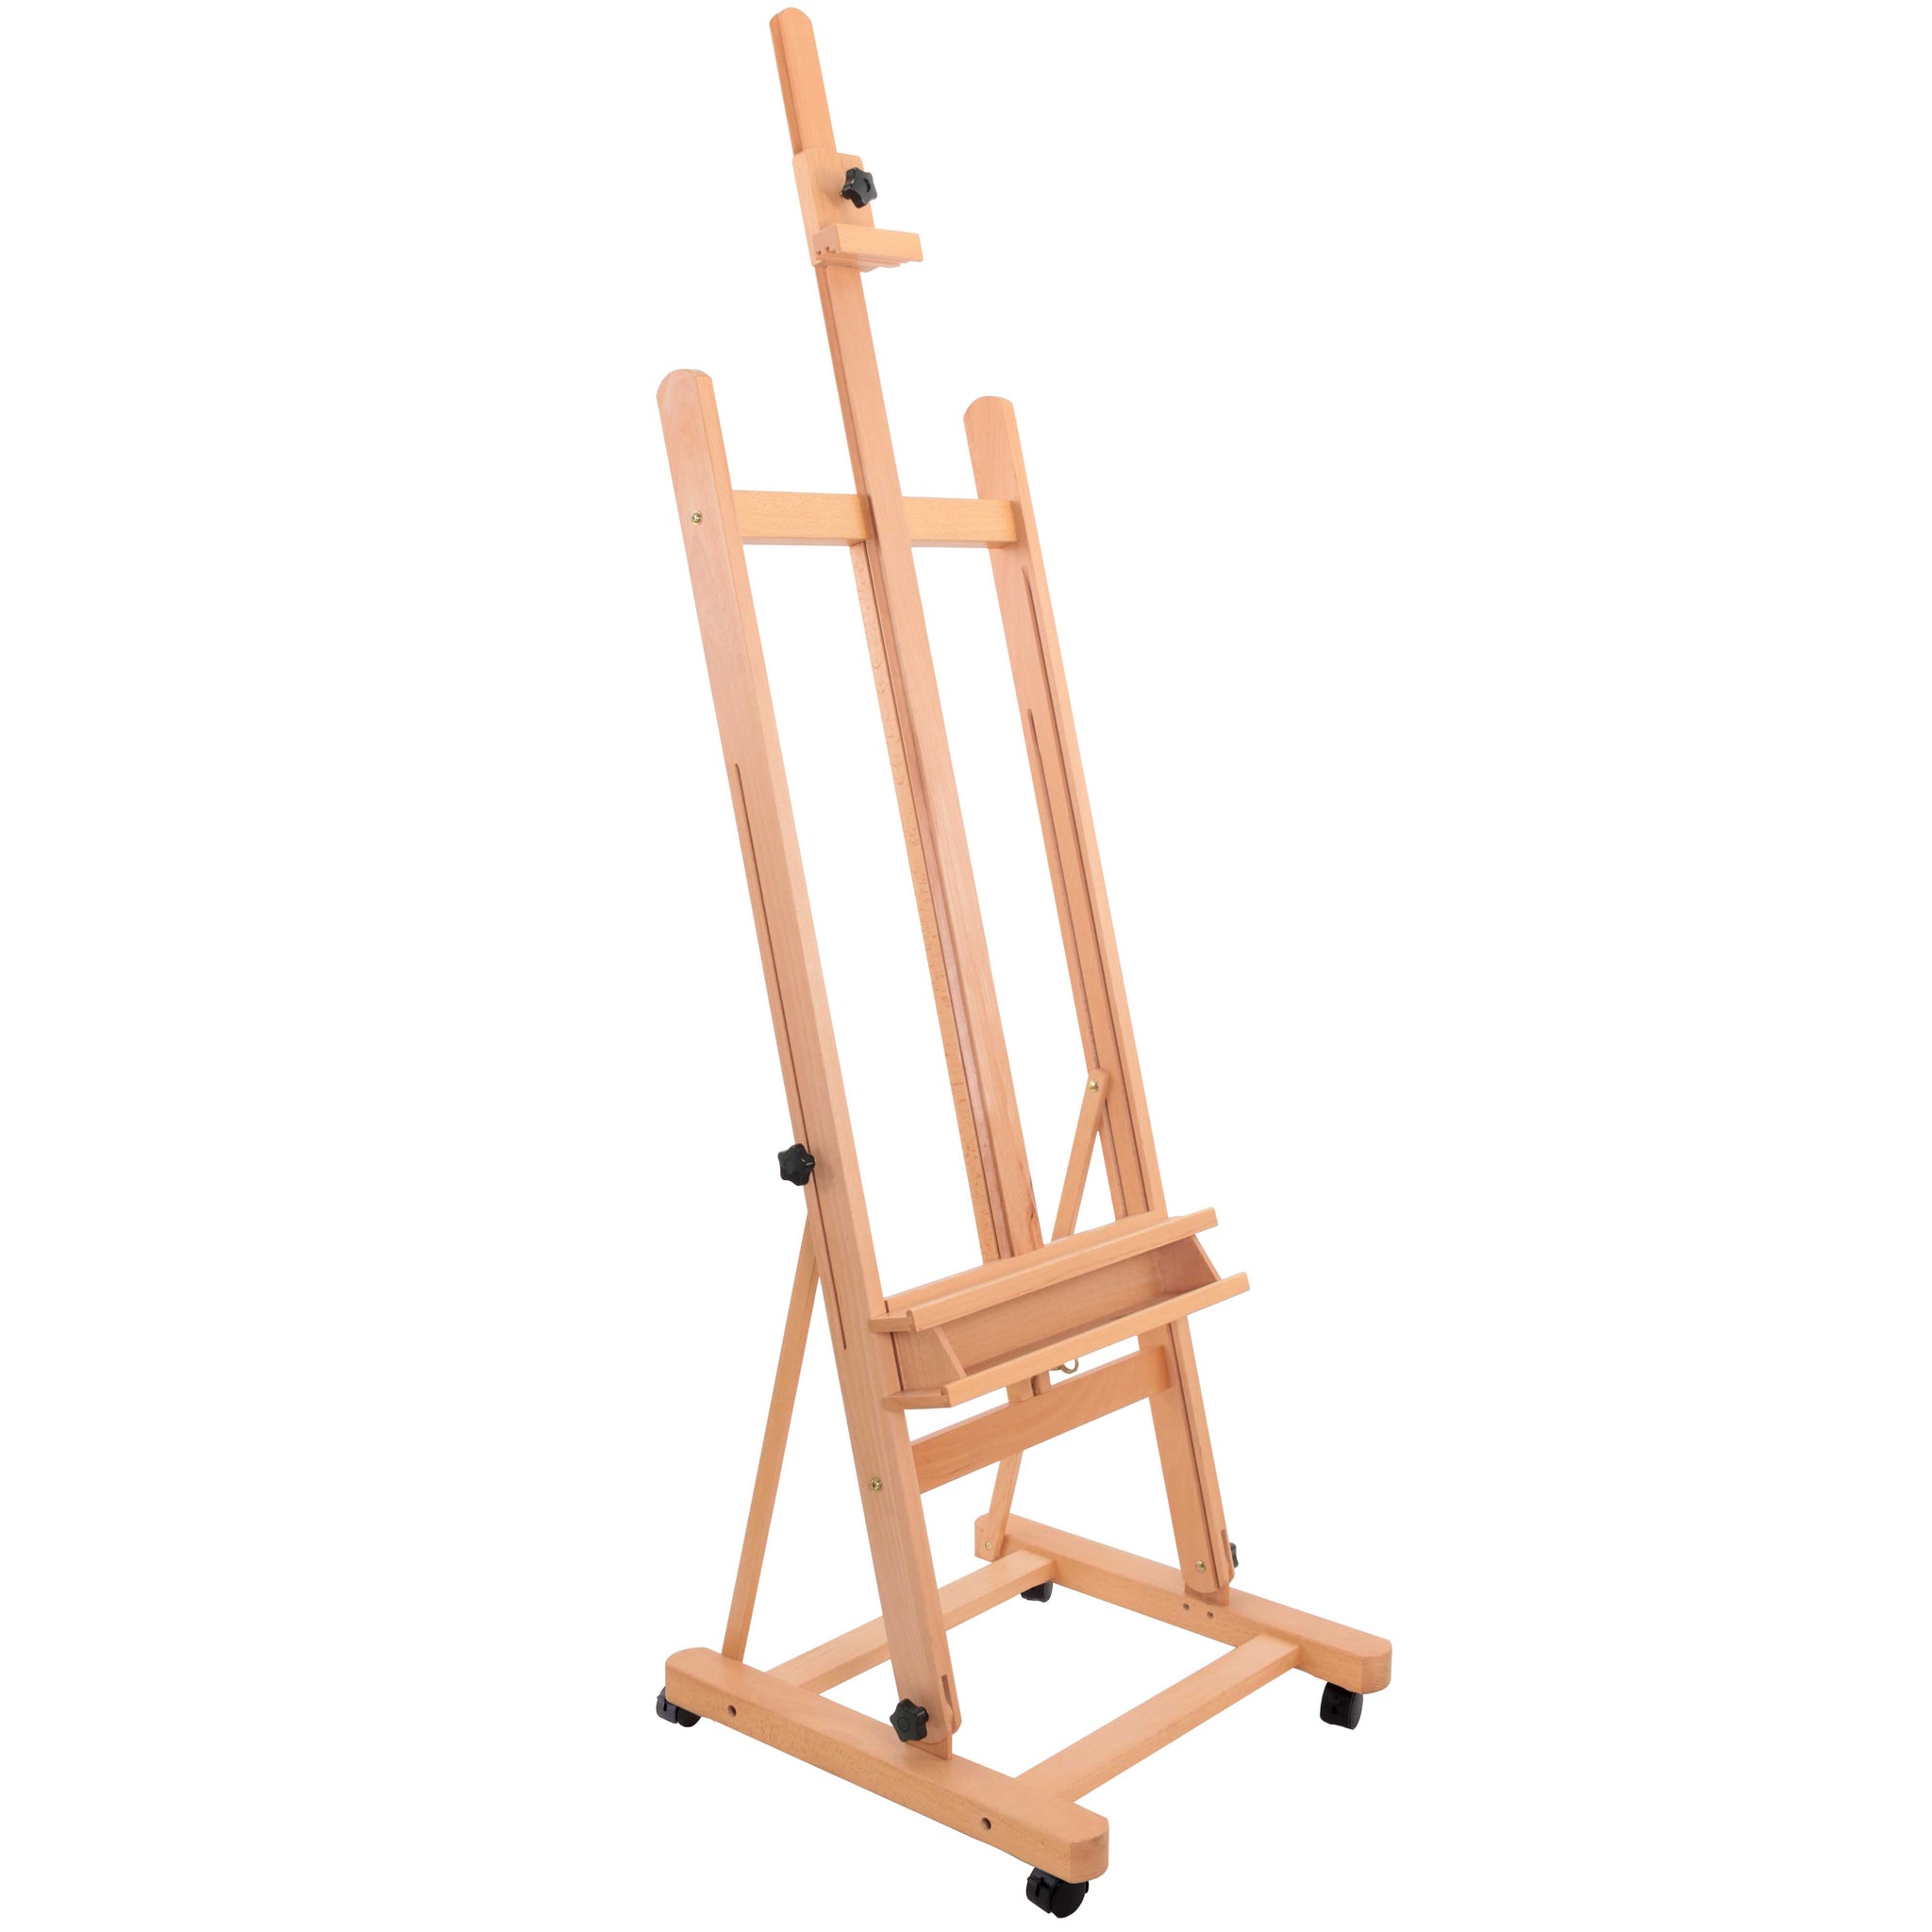 U.S. Art Supply 16 inch Mini Tabletop Wooden H-Frame Studio Easel - Artists Adjustable Beechwood Painting and Display Easel